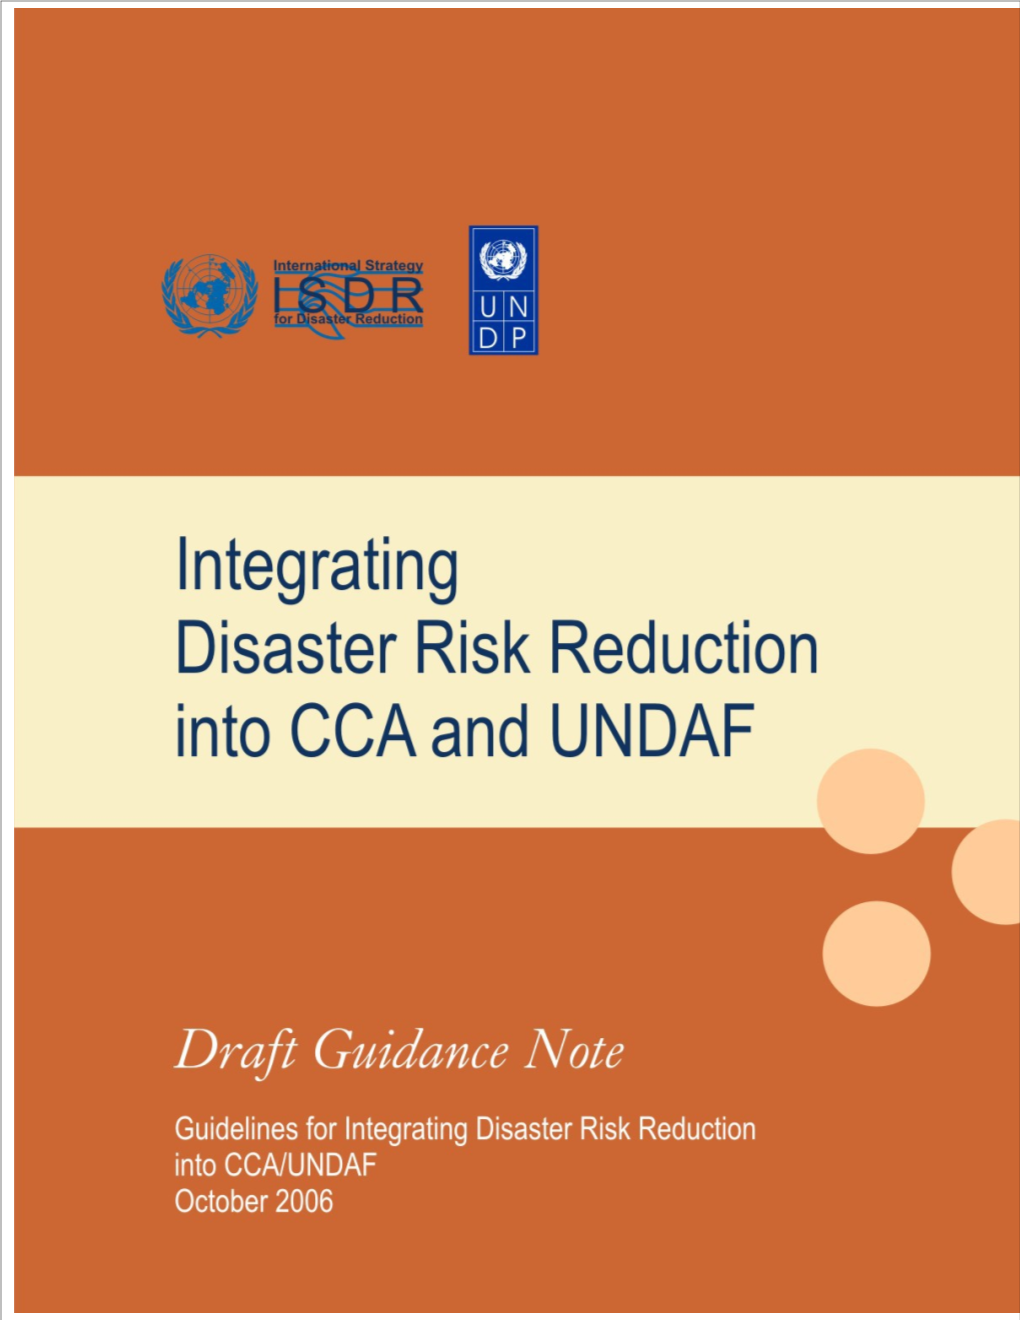 2. Incorporating Disaster Risk Reduction Into the CCA/UNDAF Process 7